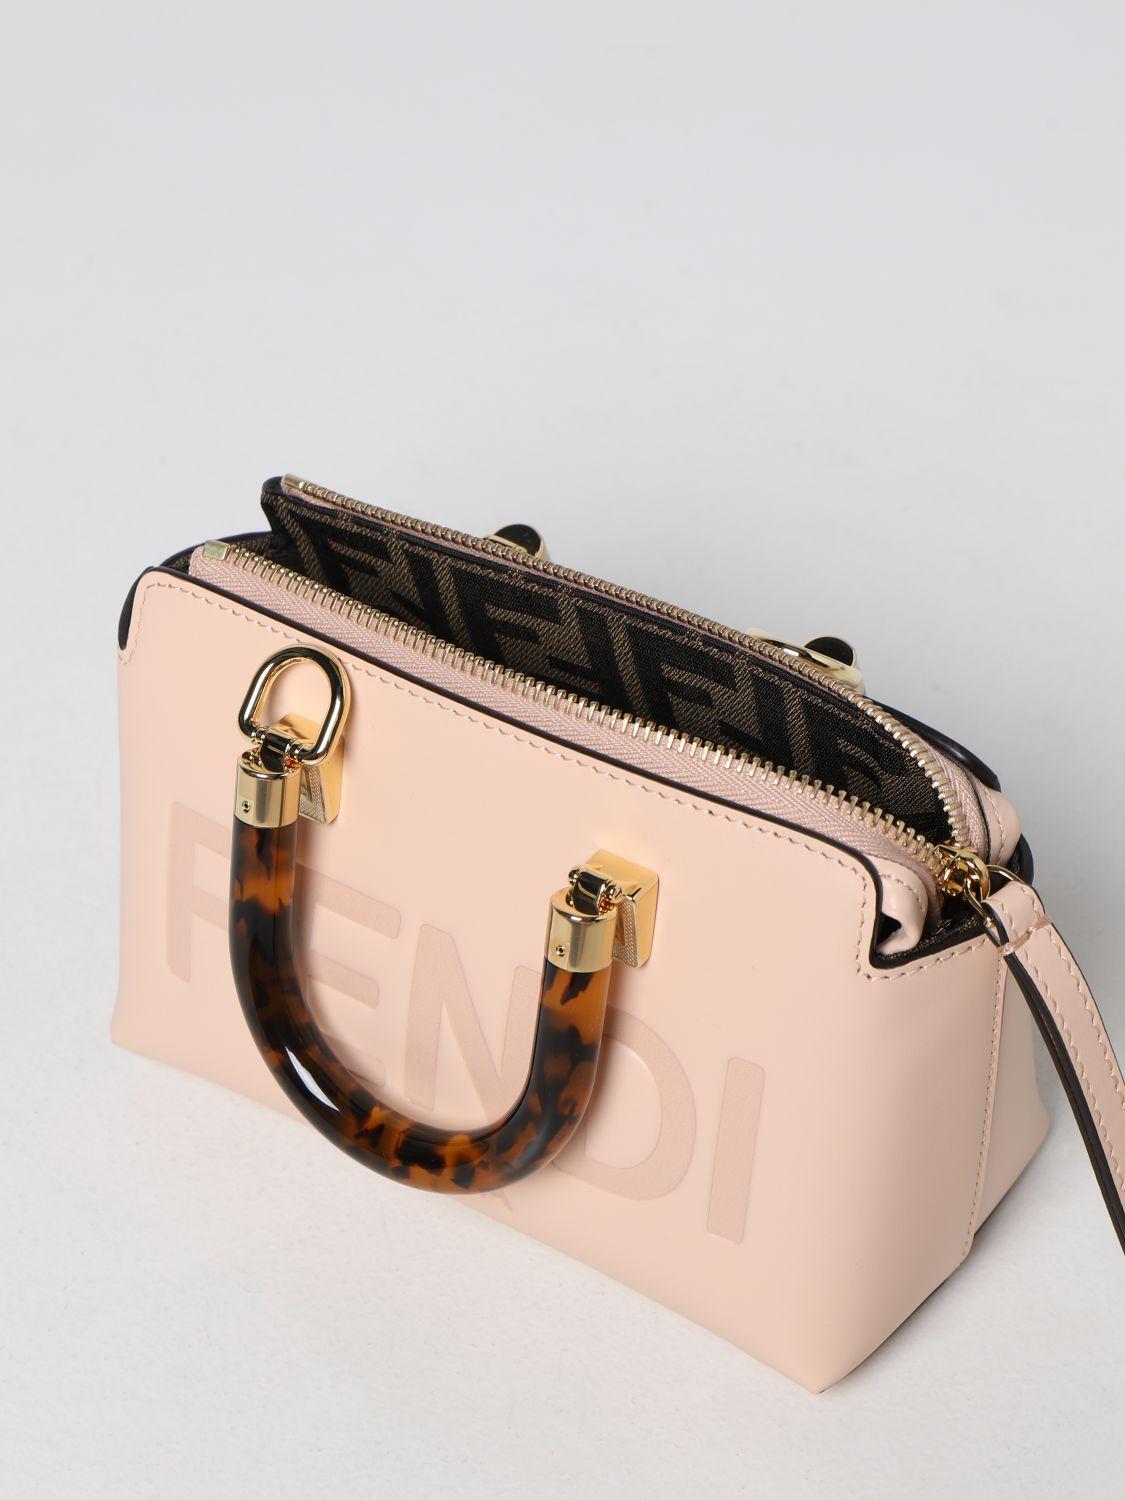 FENDI: By The Way bag in leather - White  Fendi mini bag 8BS067ABVL online  at